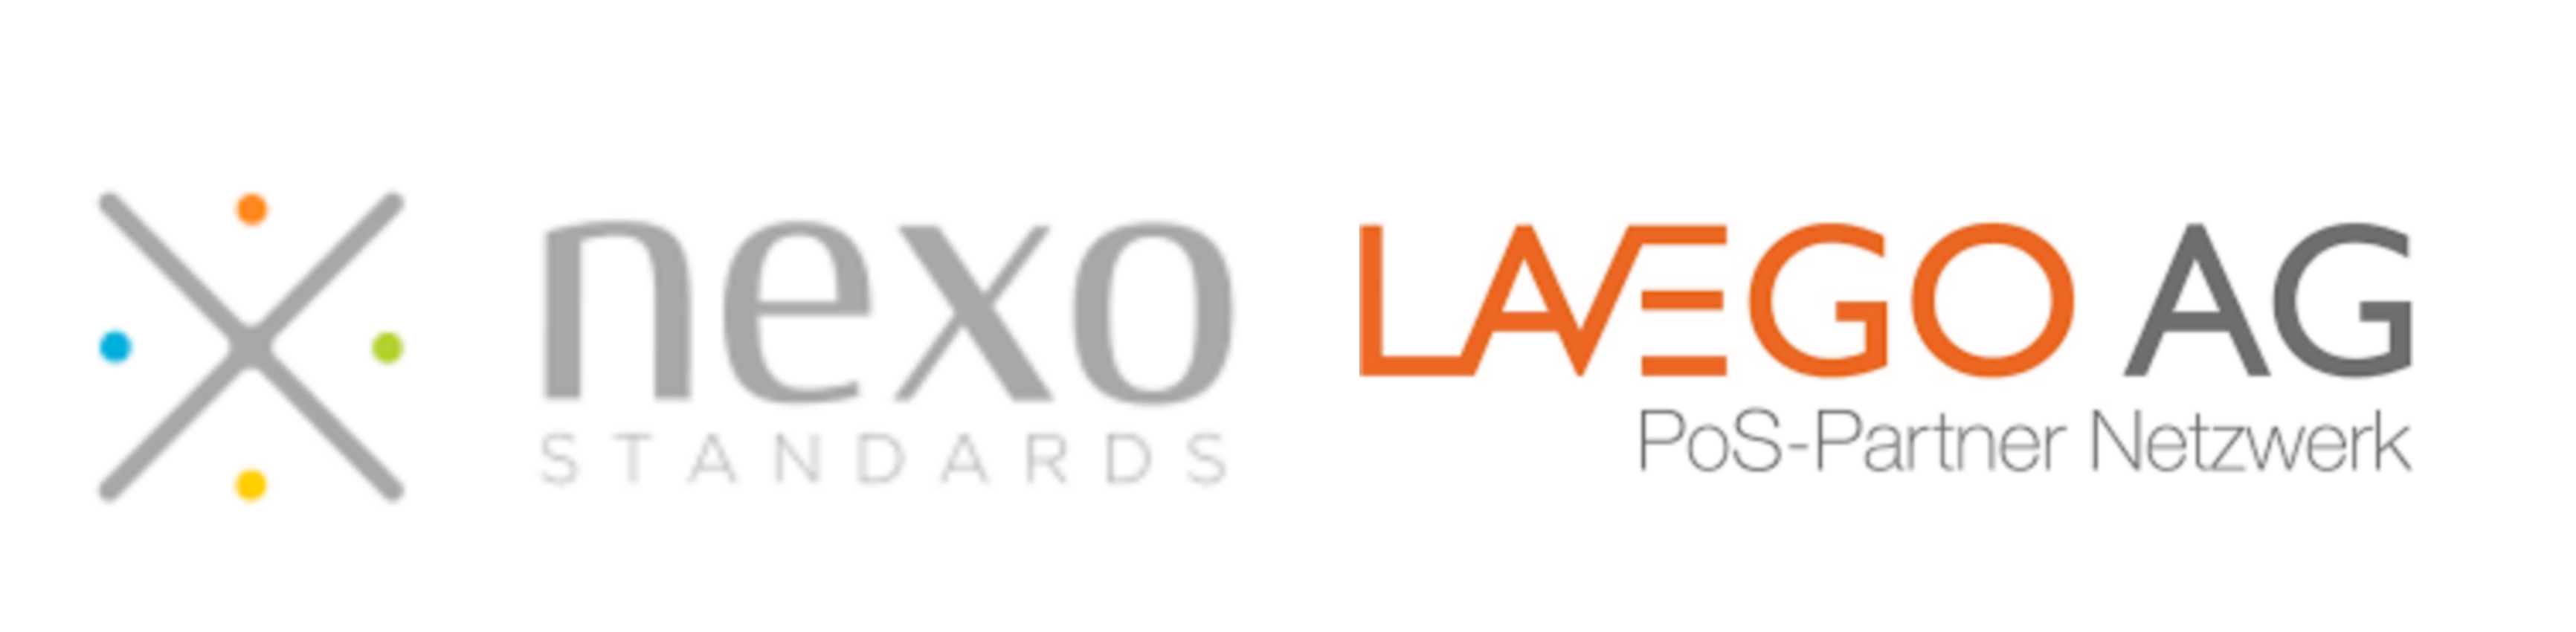  LAVEGO Chooses nexo standards to Bring Innovation to the POS